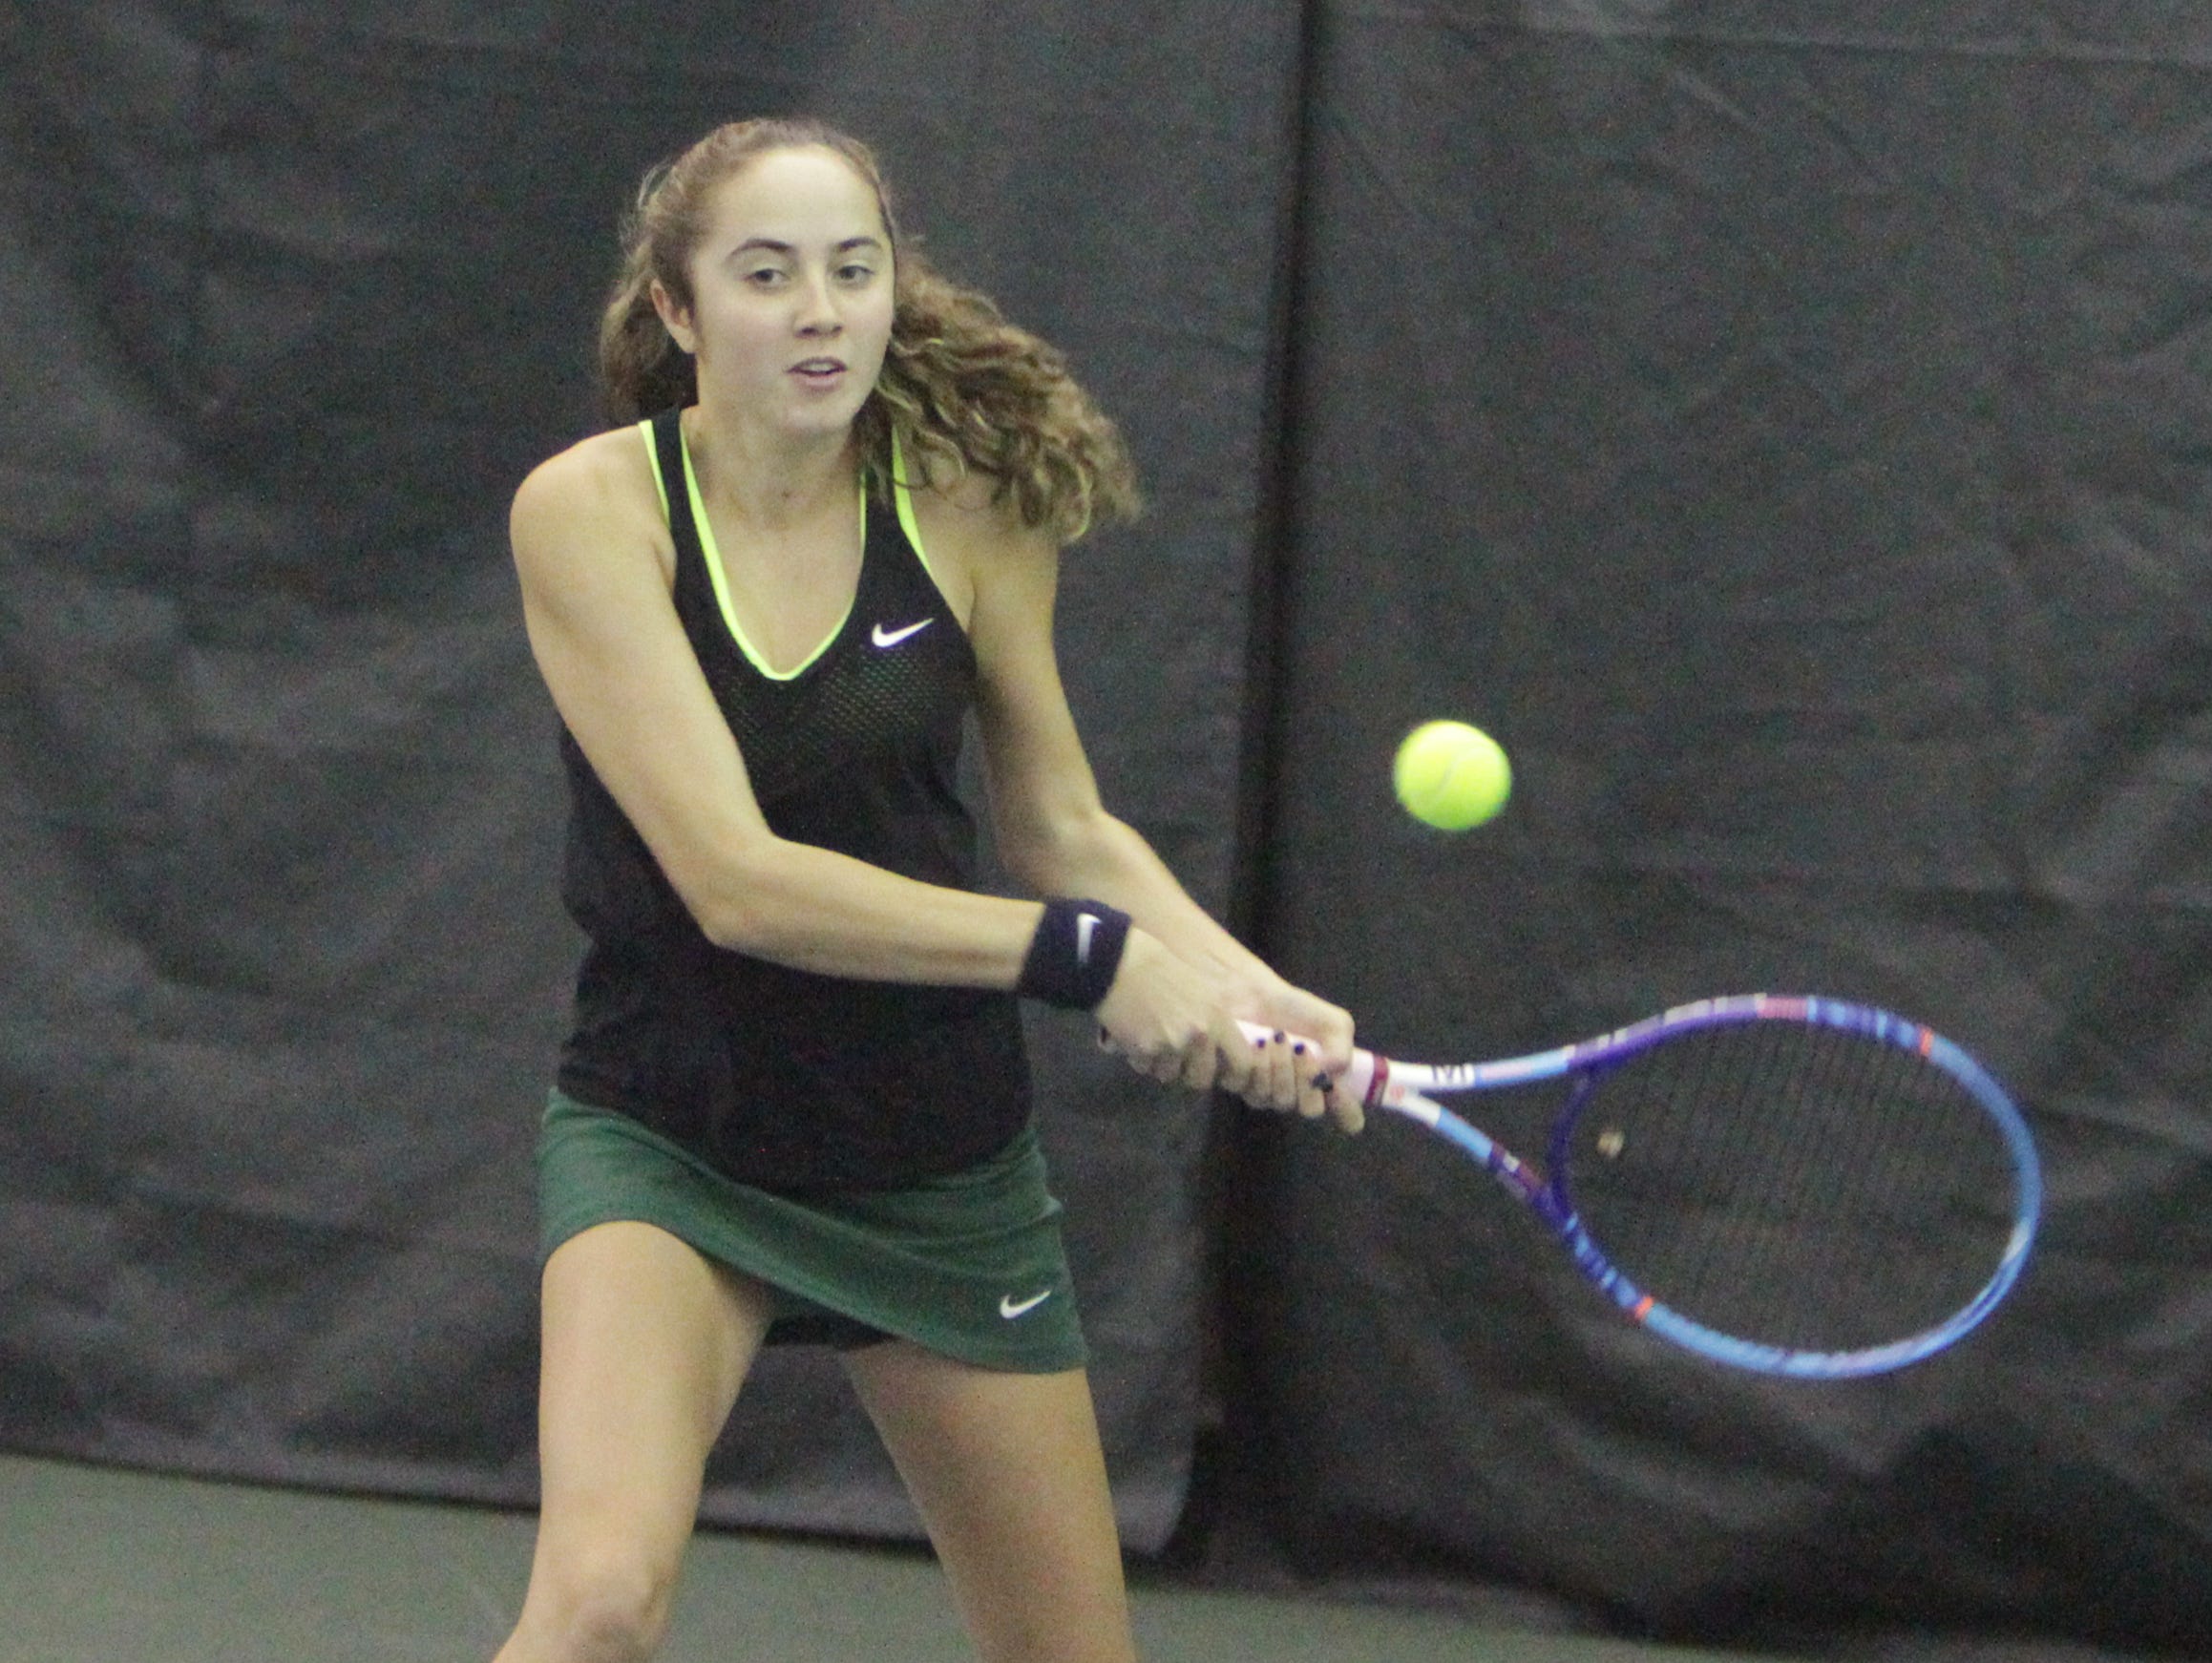 Yorktown's Caitlyn Ferrante, pictured during the second day of New York State girls tennis tournament at Sound Shore Indoor Tennis in Port Chester on Sunday, Oct. 30th, 2016.